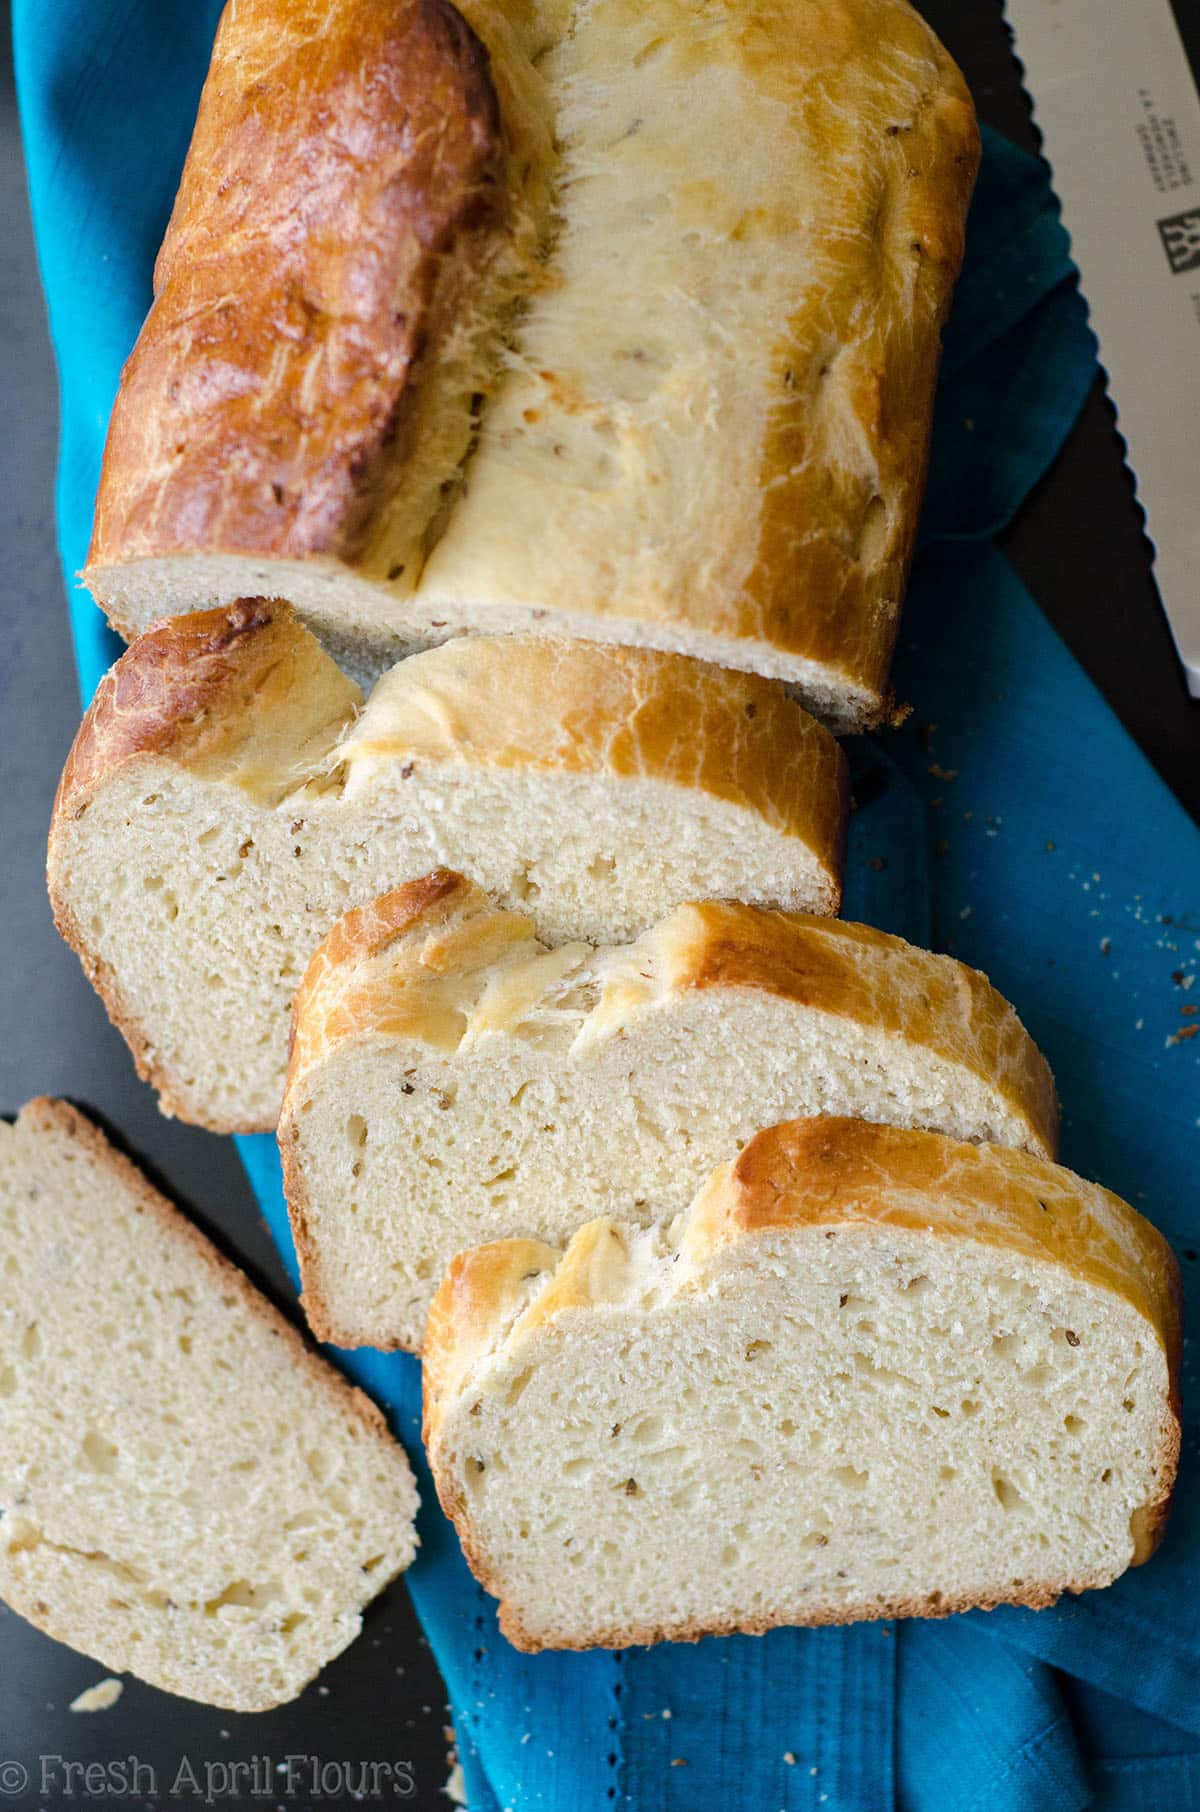 Italian Anise Bread: A sweet yeast bread with a tender crumb, flavored with anise extract and dotted with anise seeds.